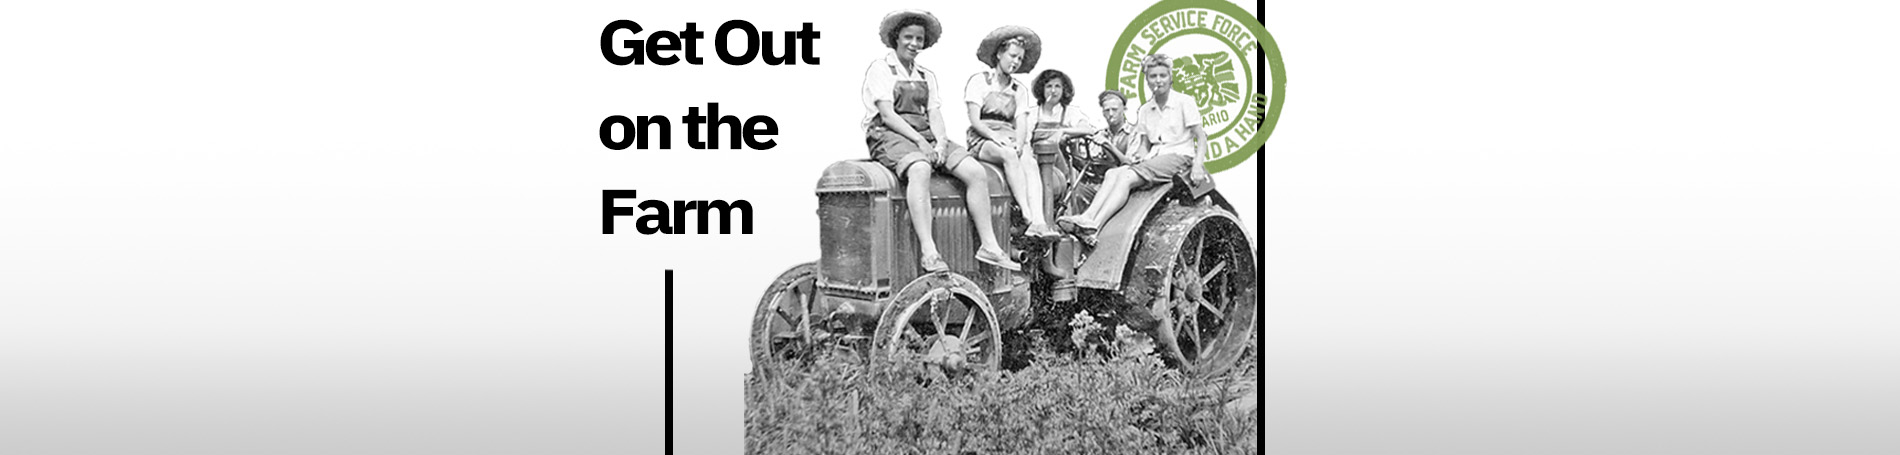 Farmerettes sit on a tractor with text,"Get Out on the Farm".